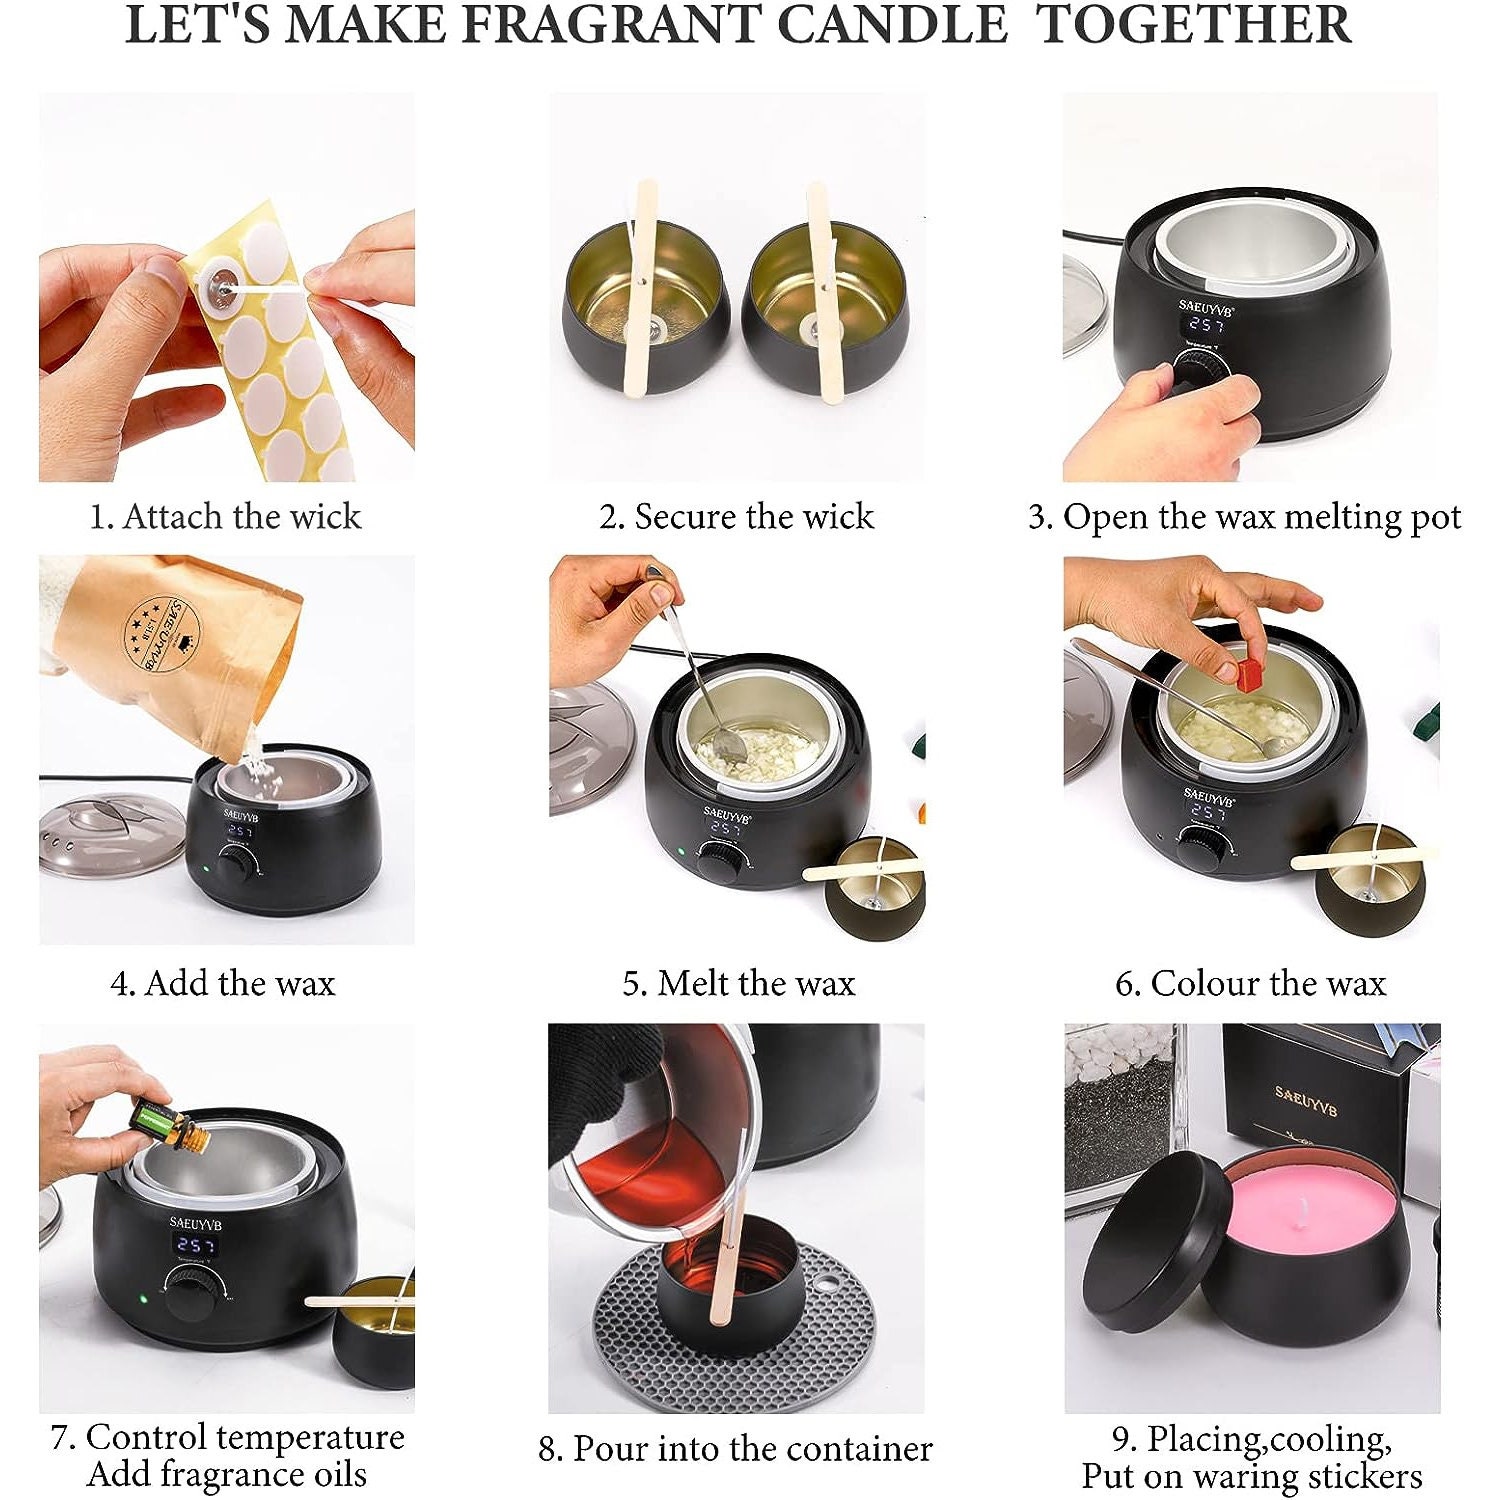 SAEUYVB Candle Making Kit for Adults with Hot Plate, DIY Starter Soy Candle Making Supplies/Kit - Perfect As Home Decorations Black